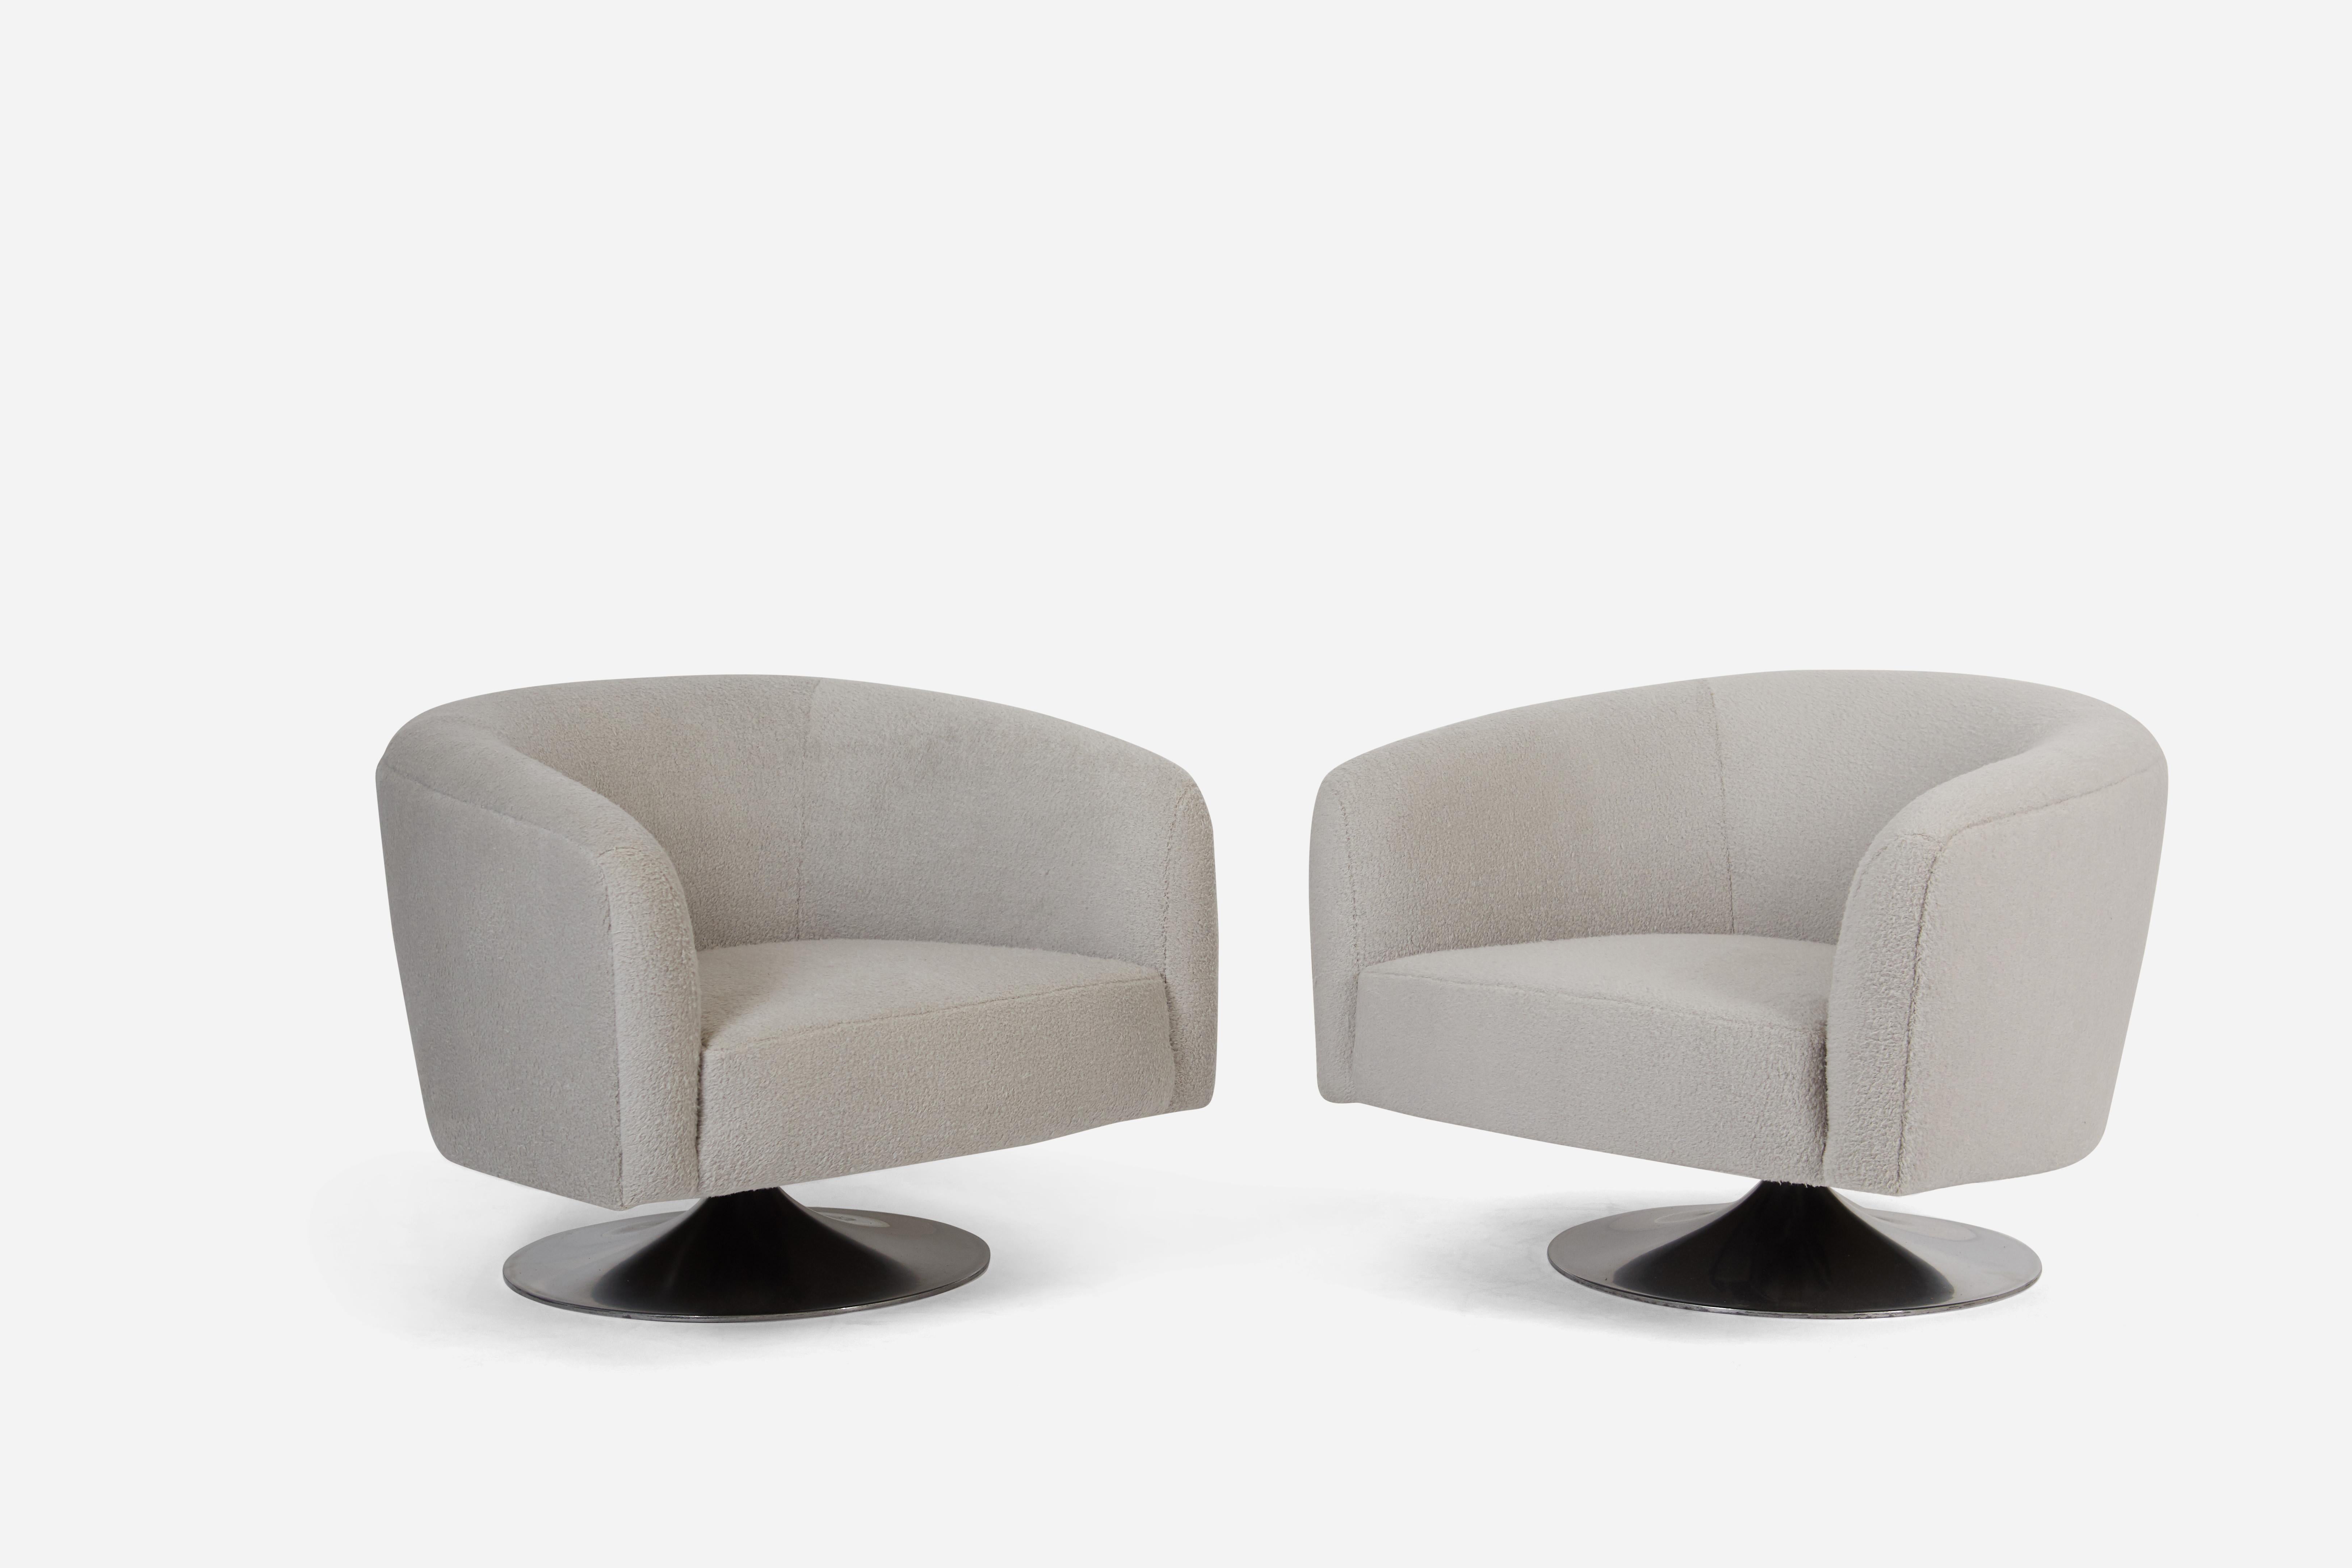 Pair of tulip/disc base swivel chairs by Milo Baughman. Fully restored and reupholstered in plush grey fabric.